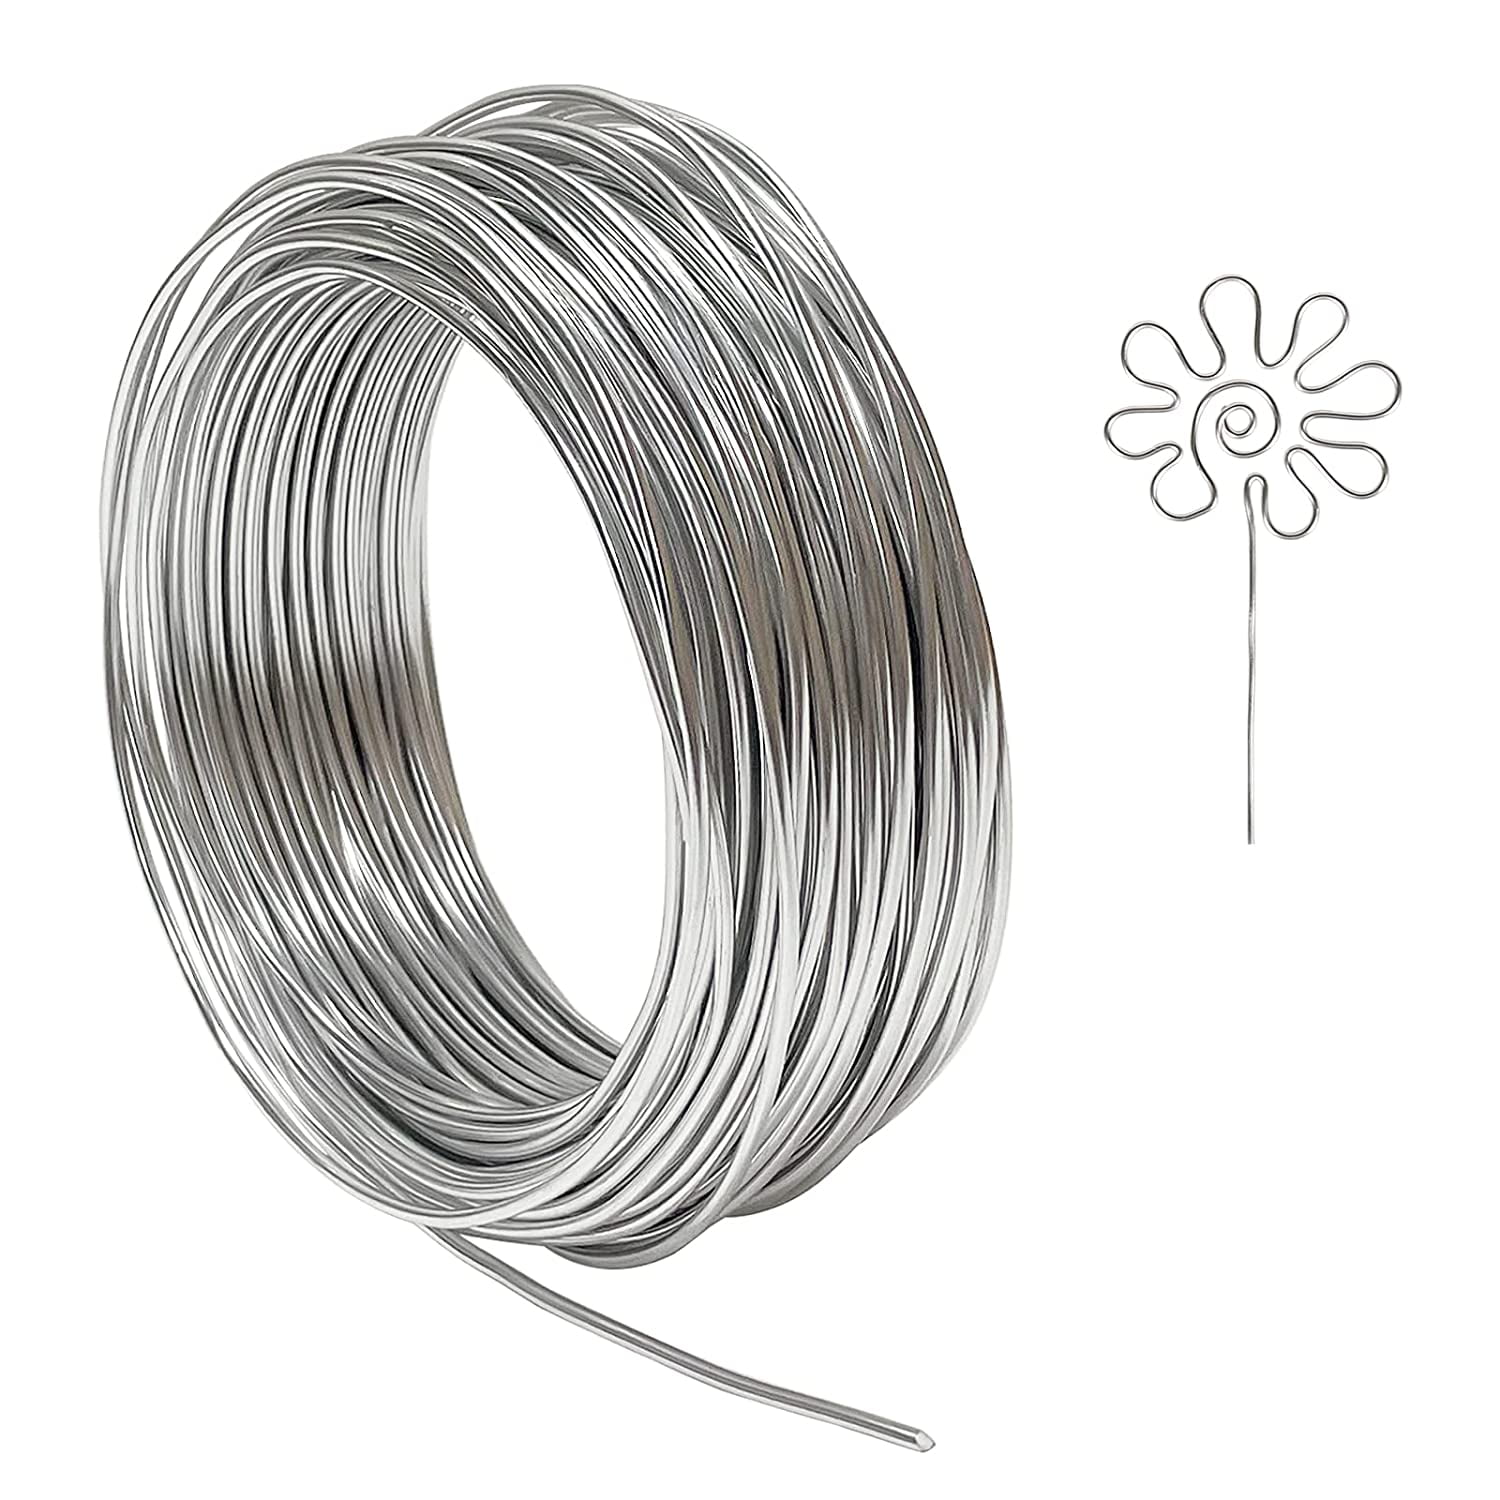 50 Meters of 3mm Mixed Color Aluminum Wire, 9 Gauge, 10 Rolls, 5 Meters per  Roll, Craft and Beading Wire, Jewelry Making & Wire Wrapping 